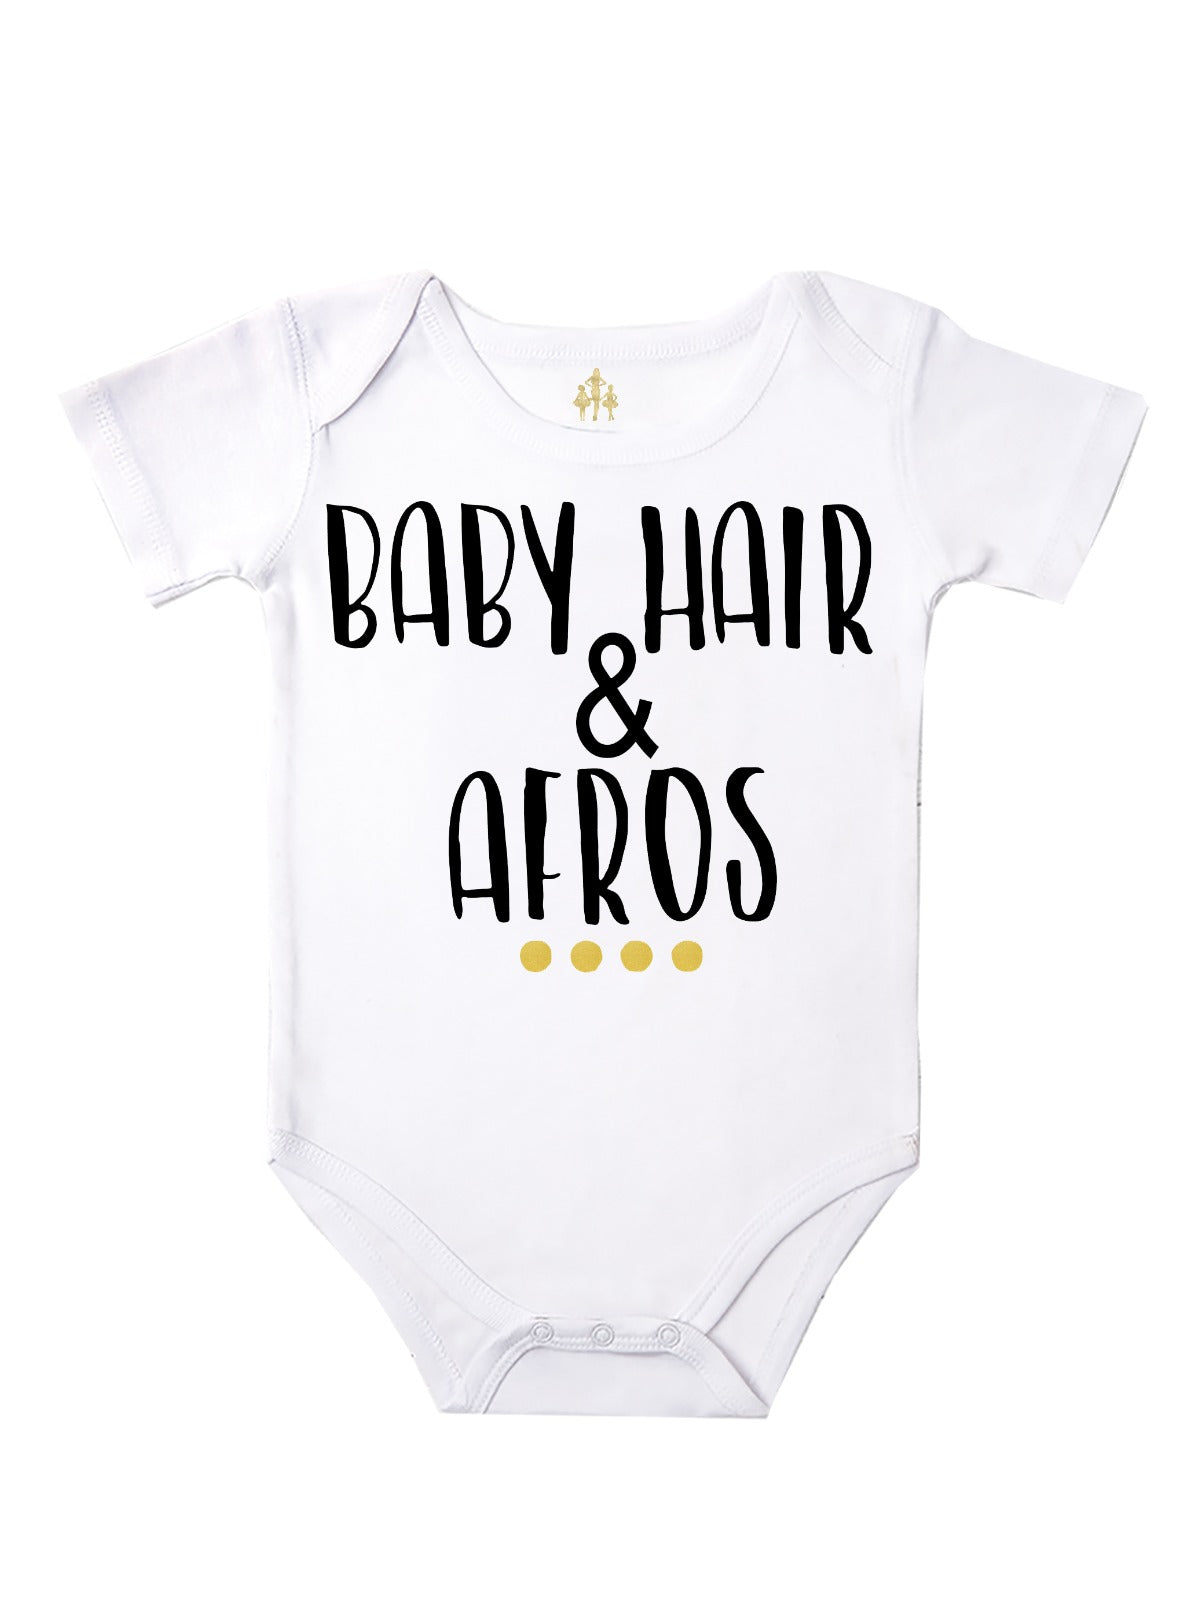 Baby Hair and afros baby bodysuit